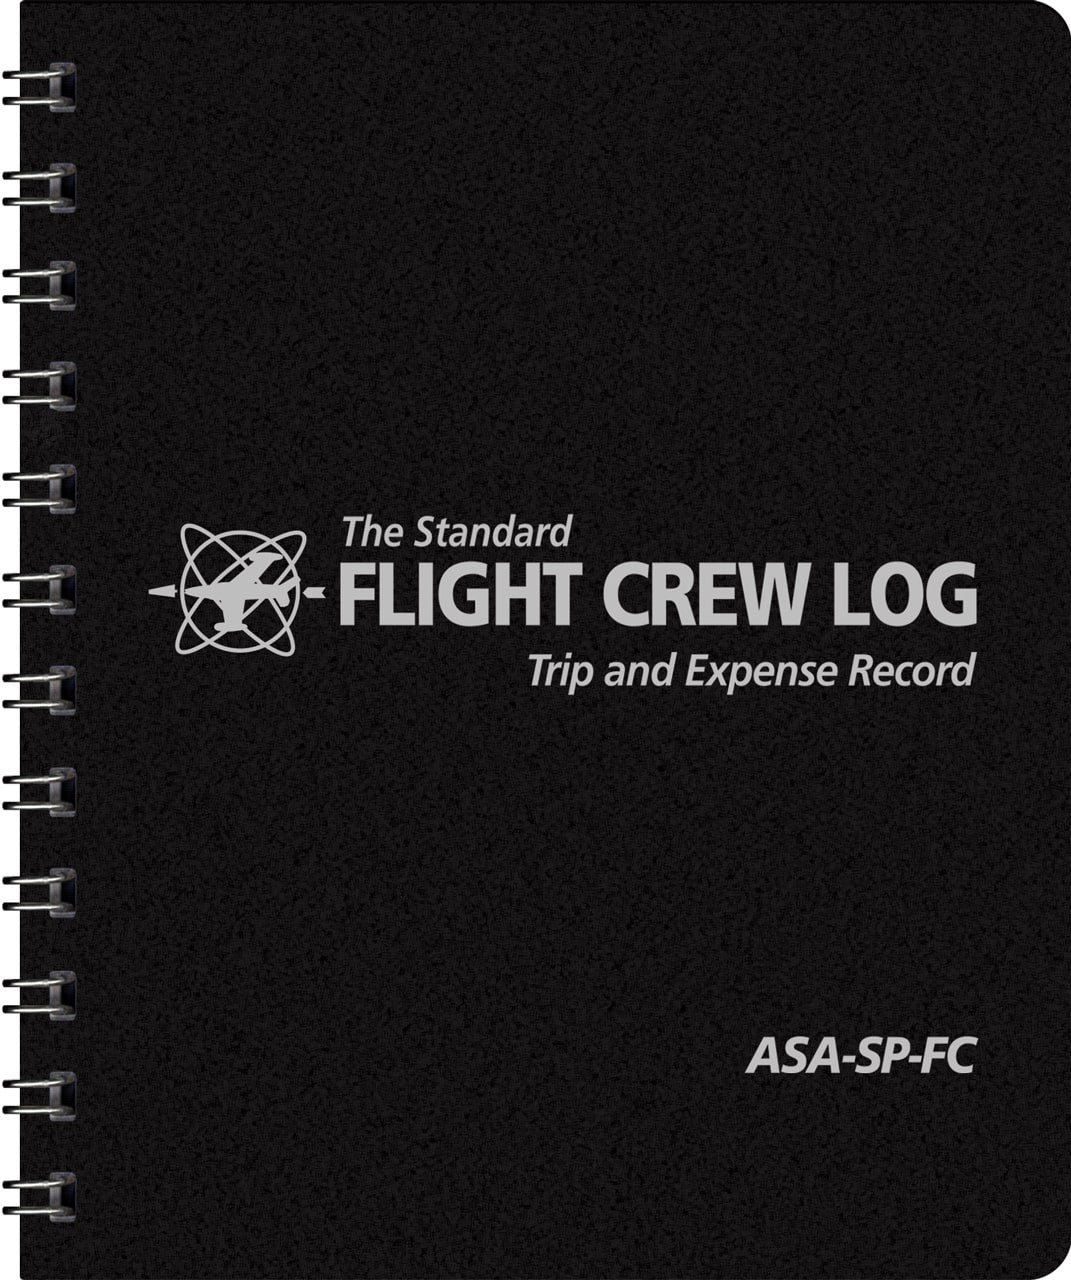 a black cover standard flight crew log book - trip and expense record.